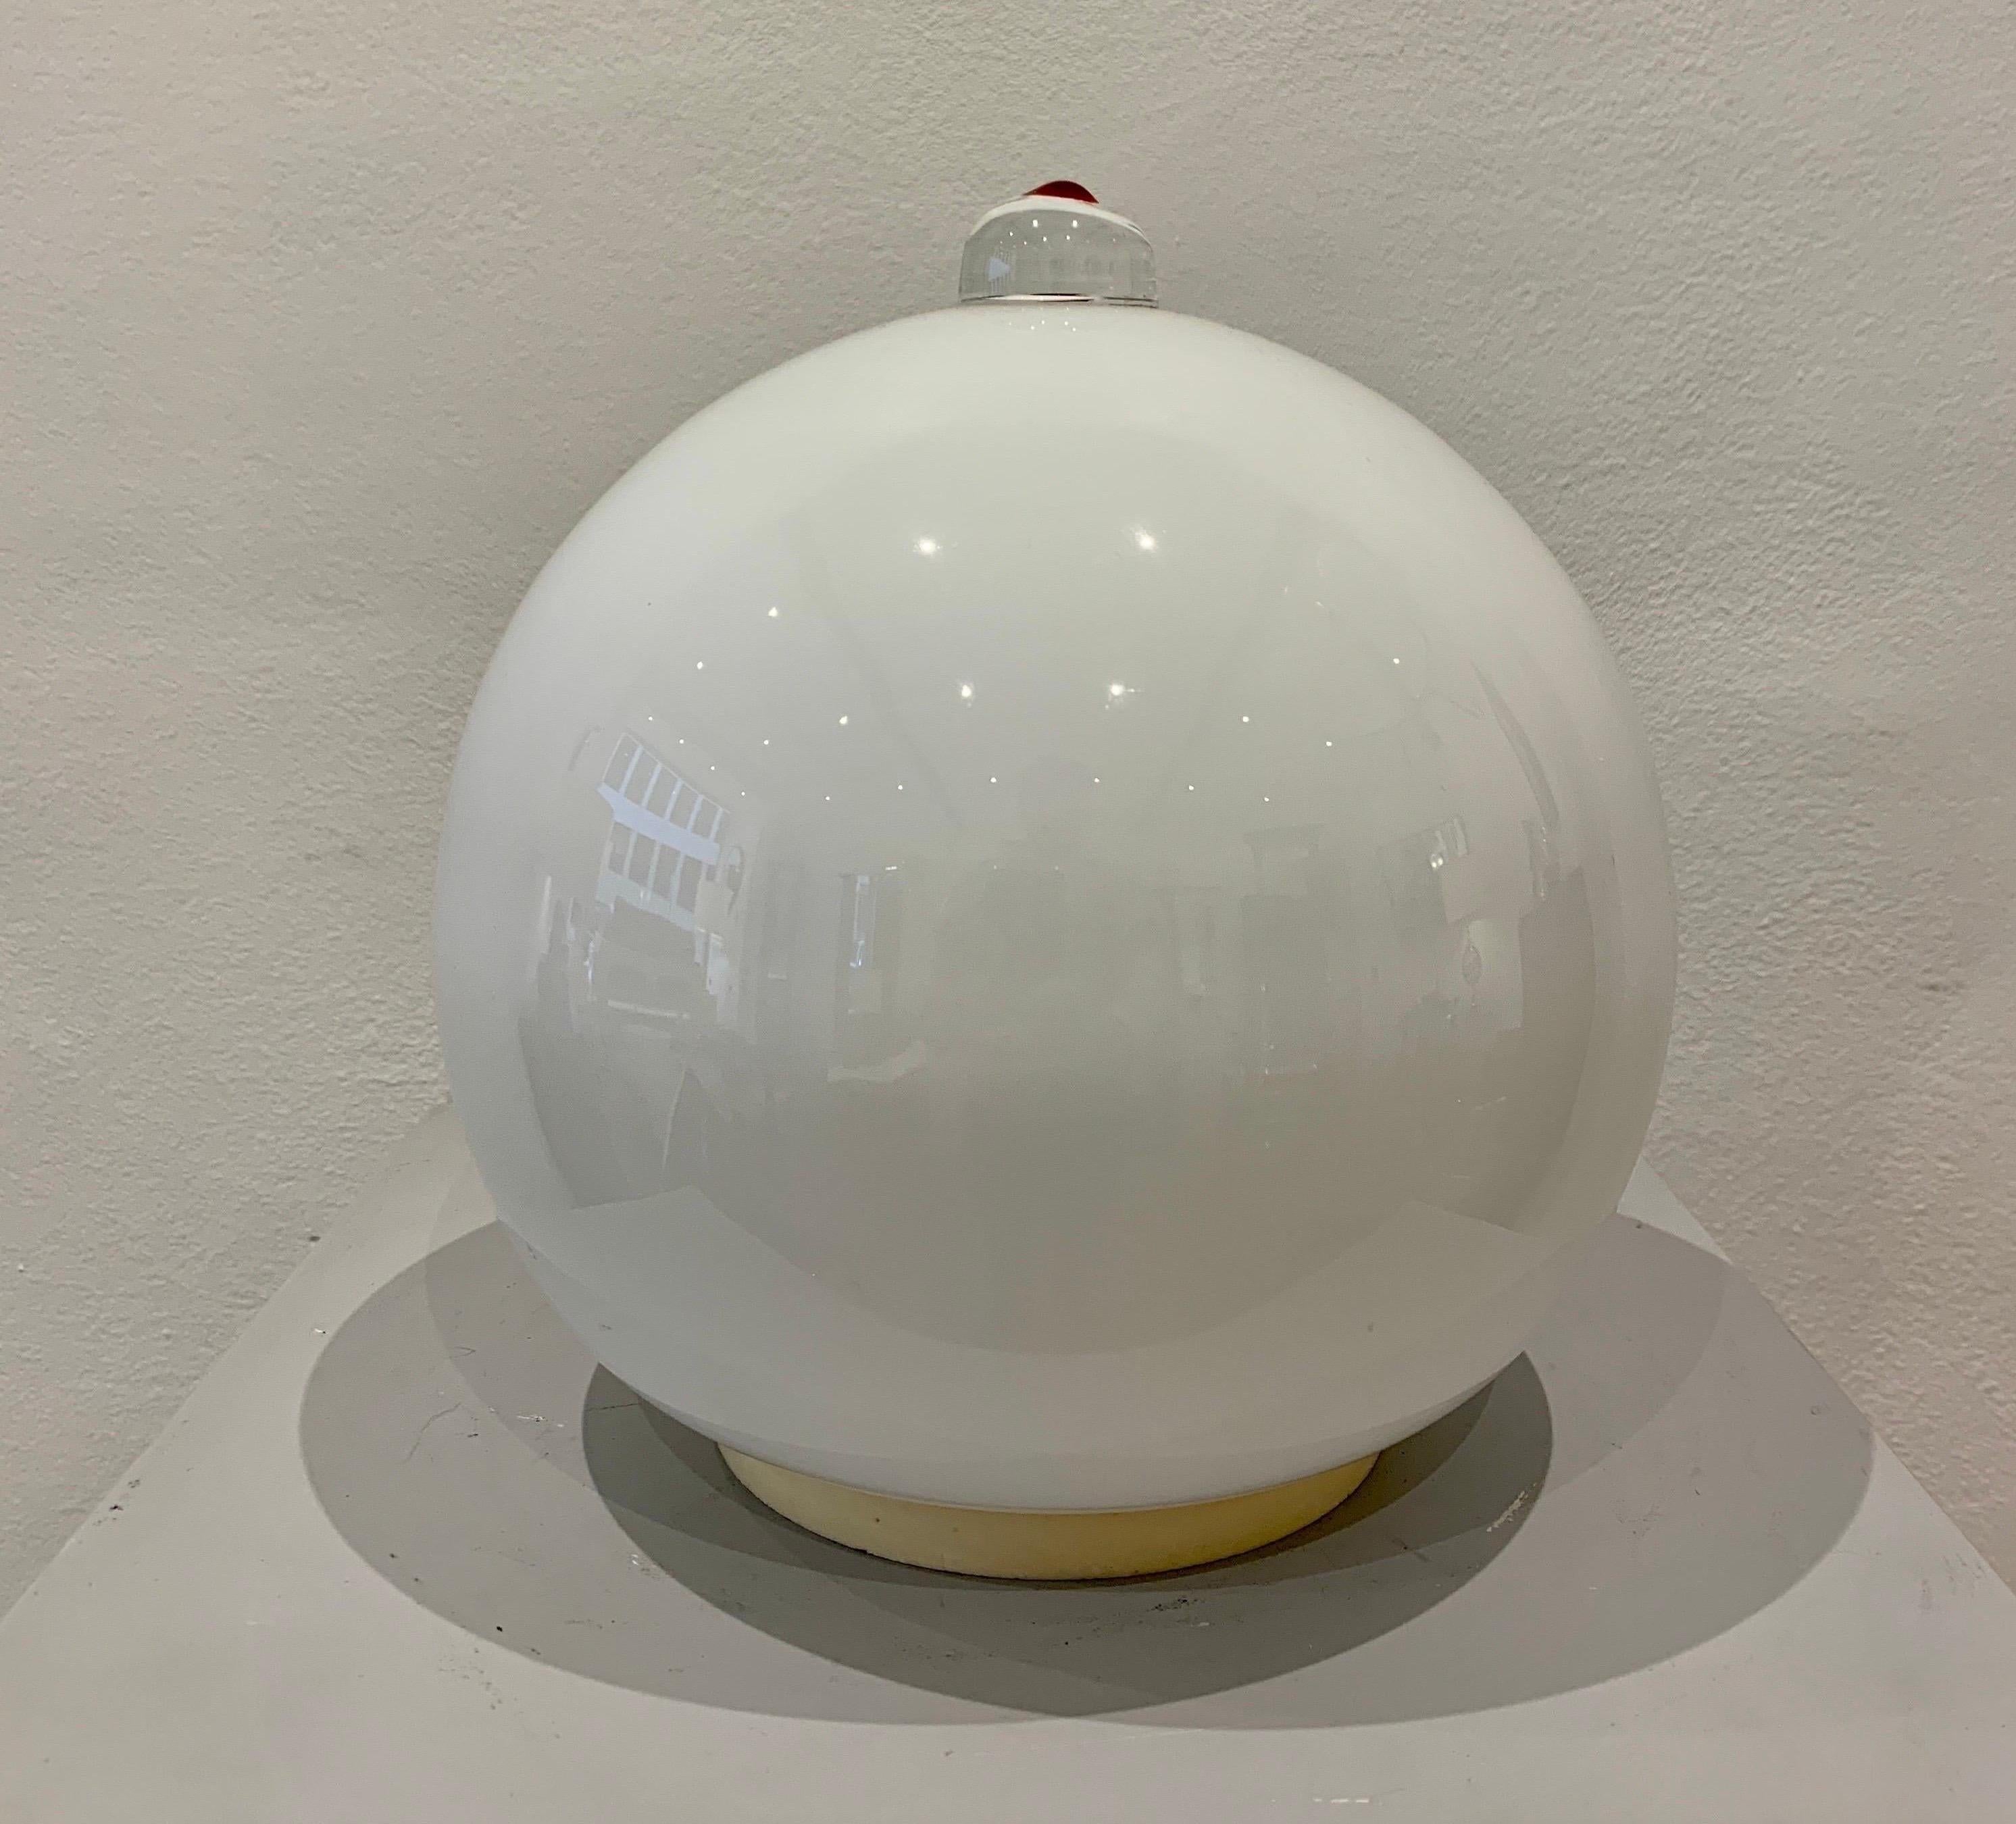 Leucos is an Italian light company which started in the 1960s. Interested in design and Venetian glass they created lamps with innovative design. The early design were provided by the Pamio's brother, architect Roberto Pamio, and the husband-wife